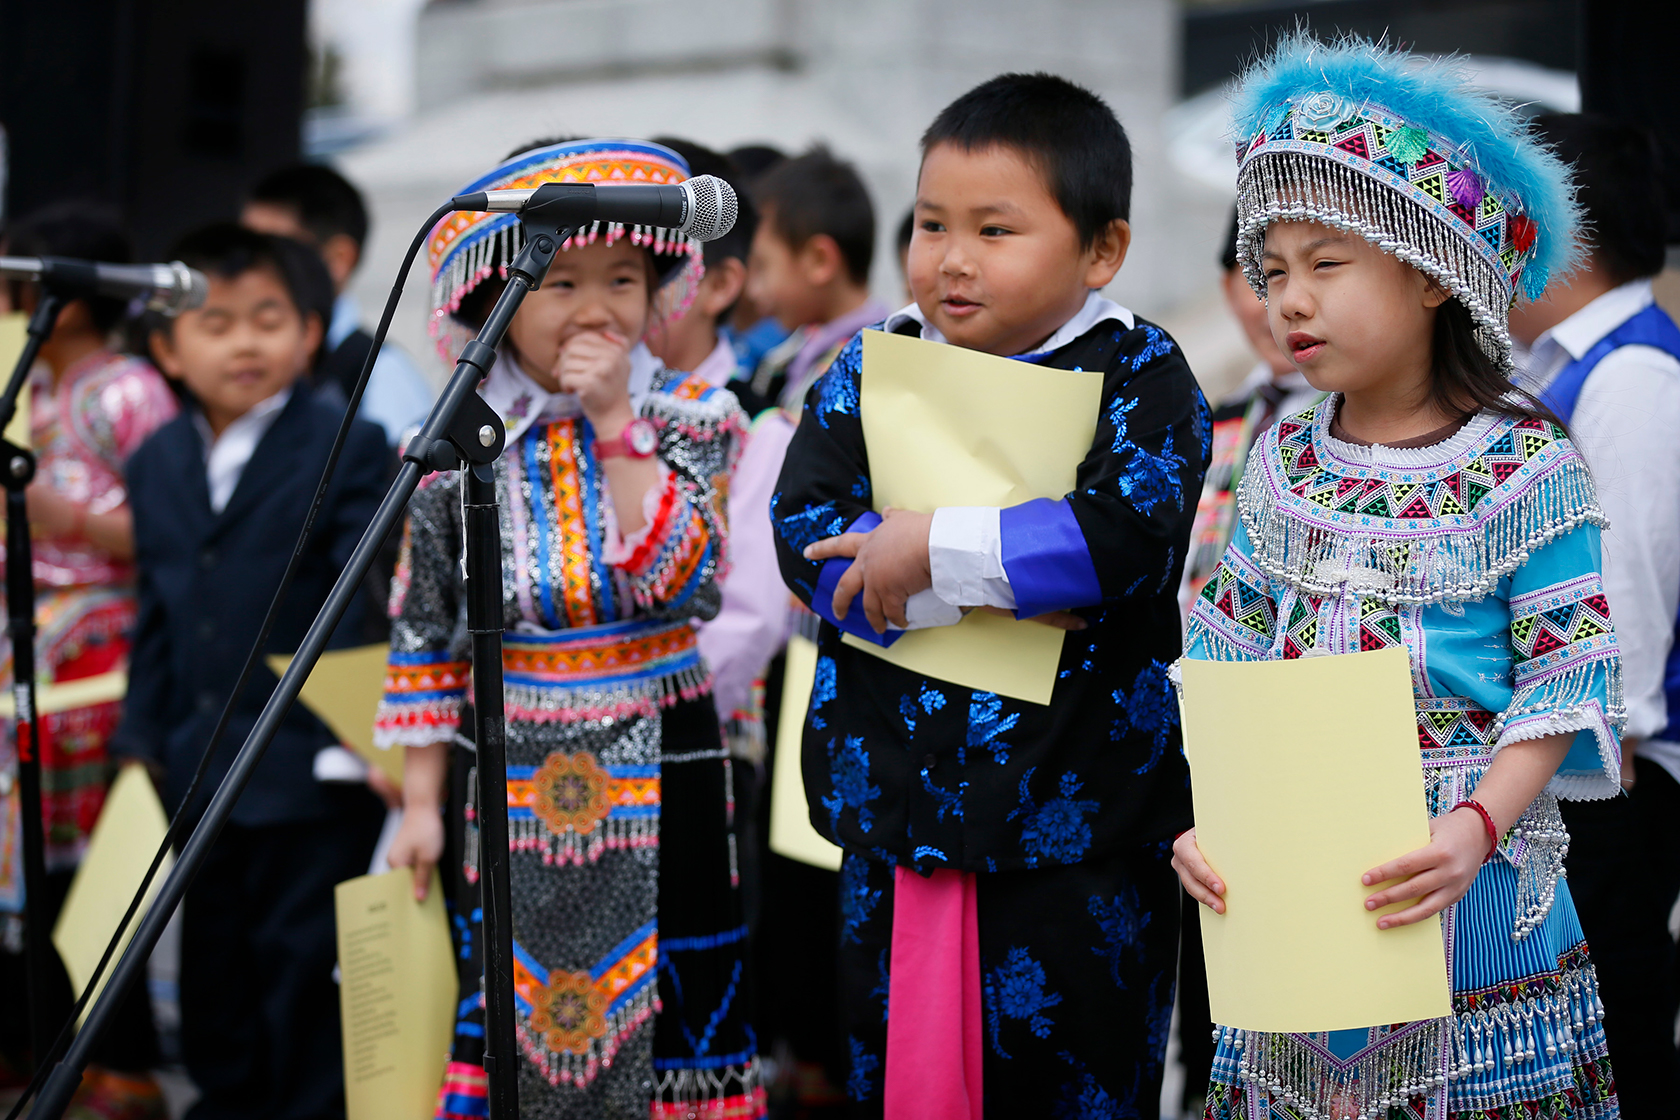 A group of young (1st grade) Asian students dressed in colorful traditional clothing, standing in front of a microphone. They are holding sheets of light yellow paper, performing folk poetry for the Hmong American Day celebration at the state capitol.